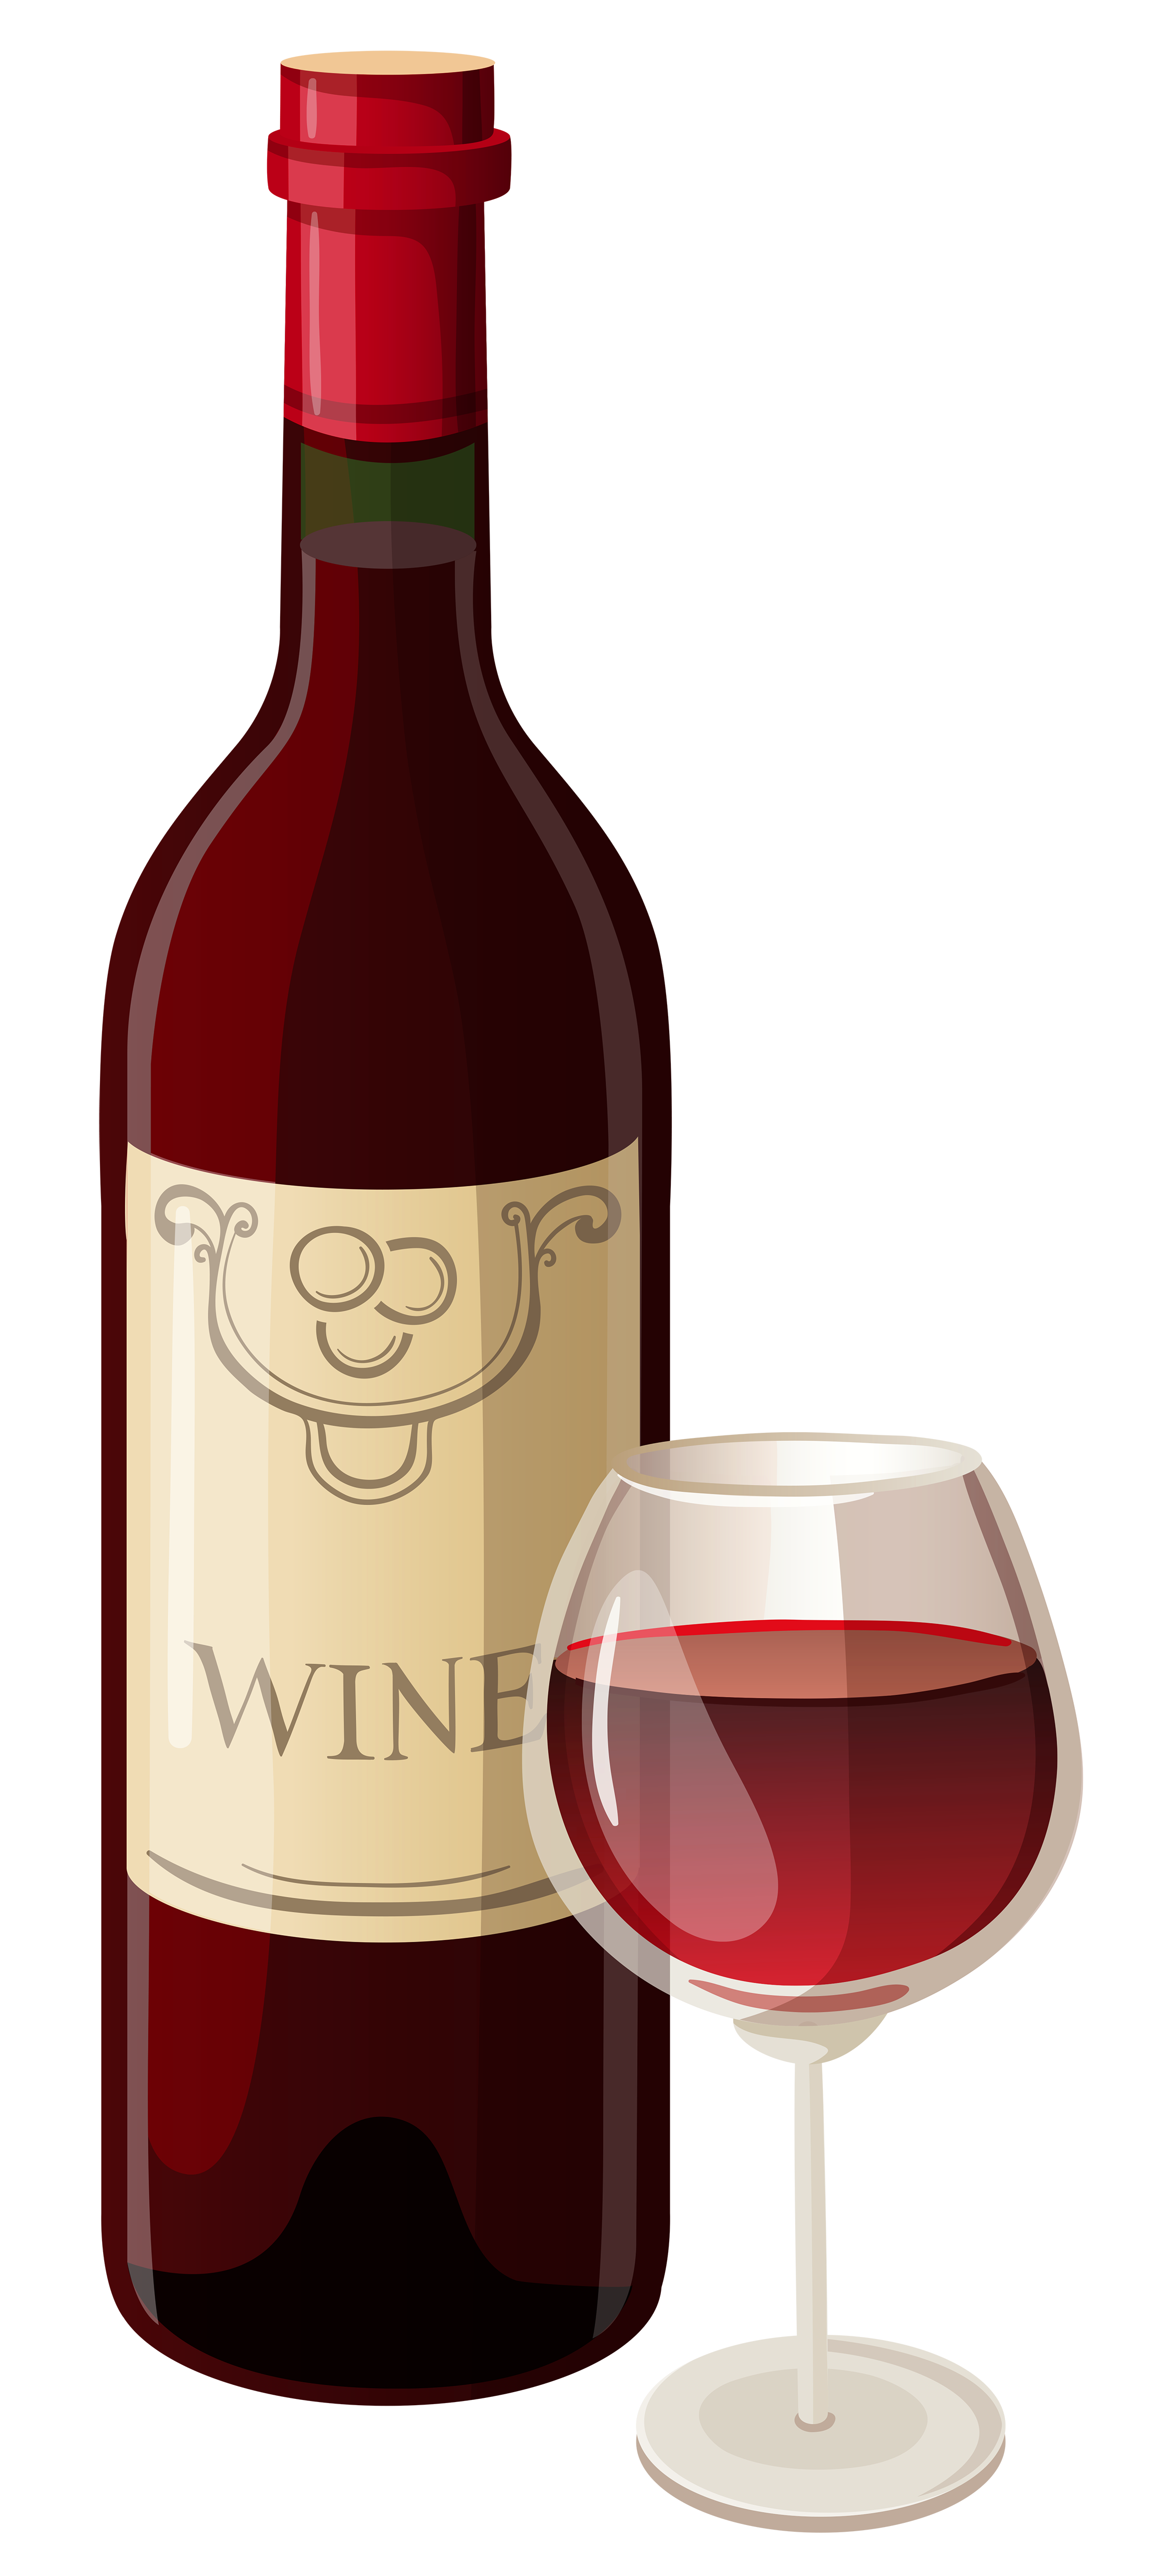 Wine bottle and glass vector clipart - Clipartix